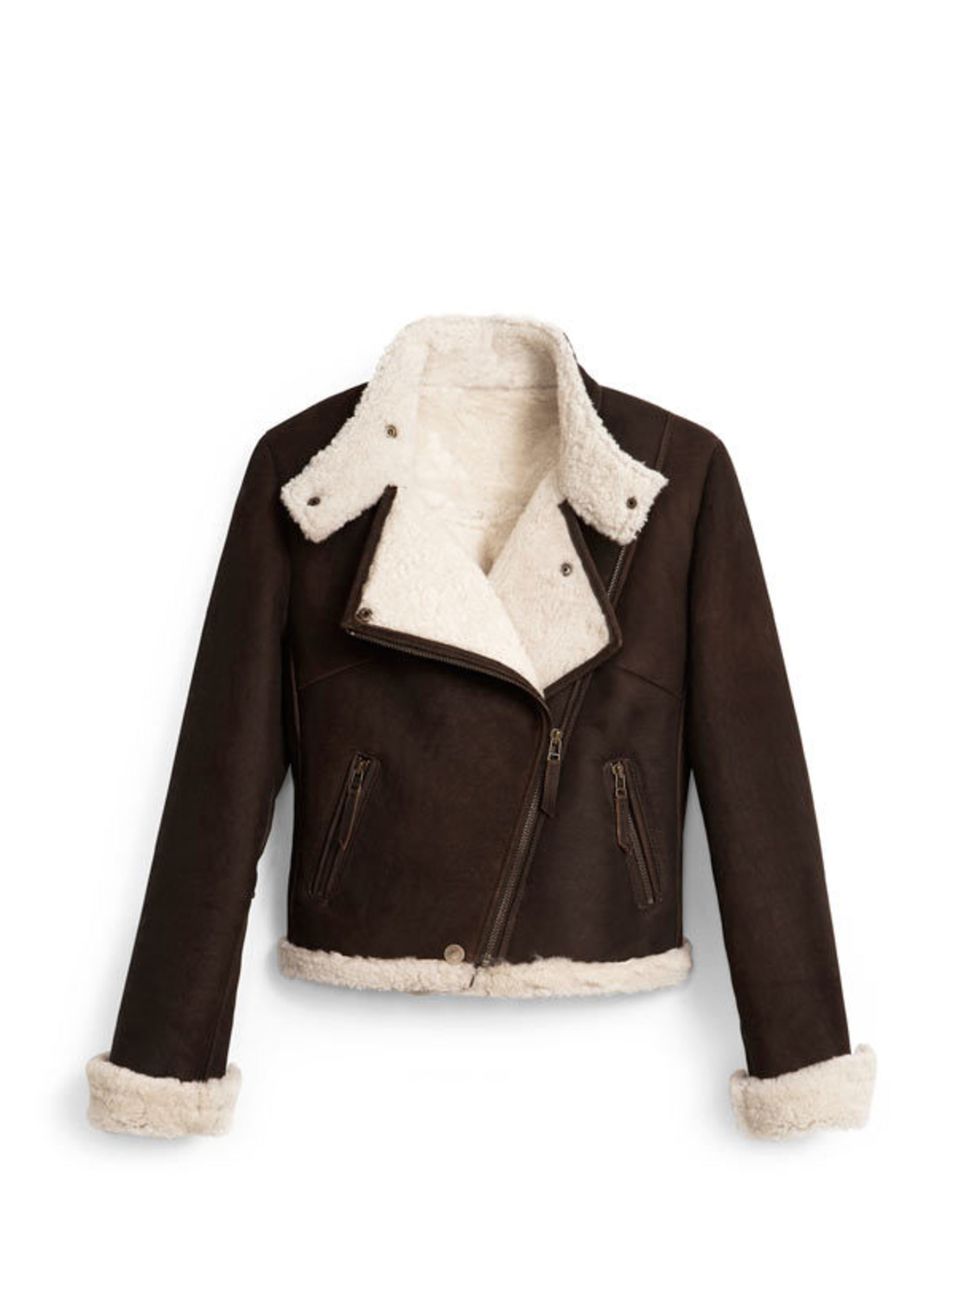 <p>Hobbs shearling jacket, £599, for stockists call 0845 313 3130</p>